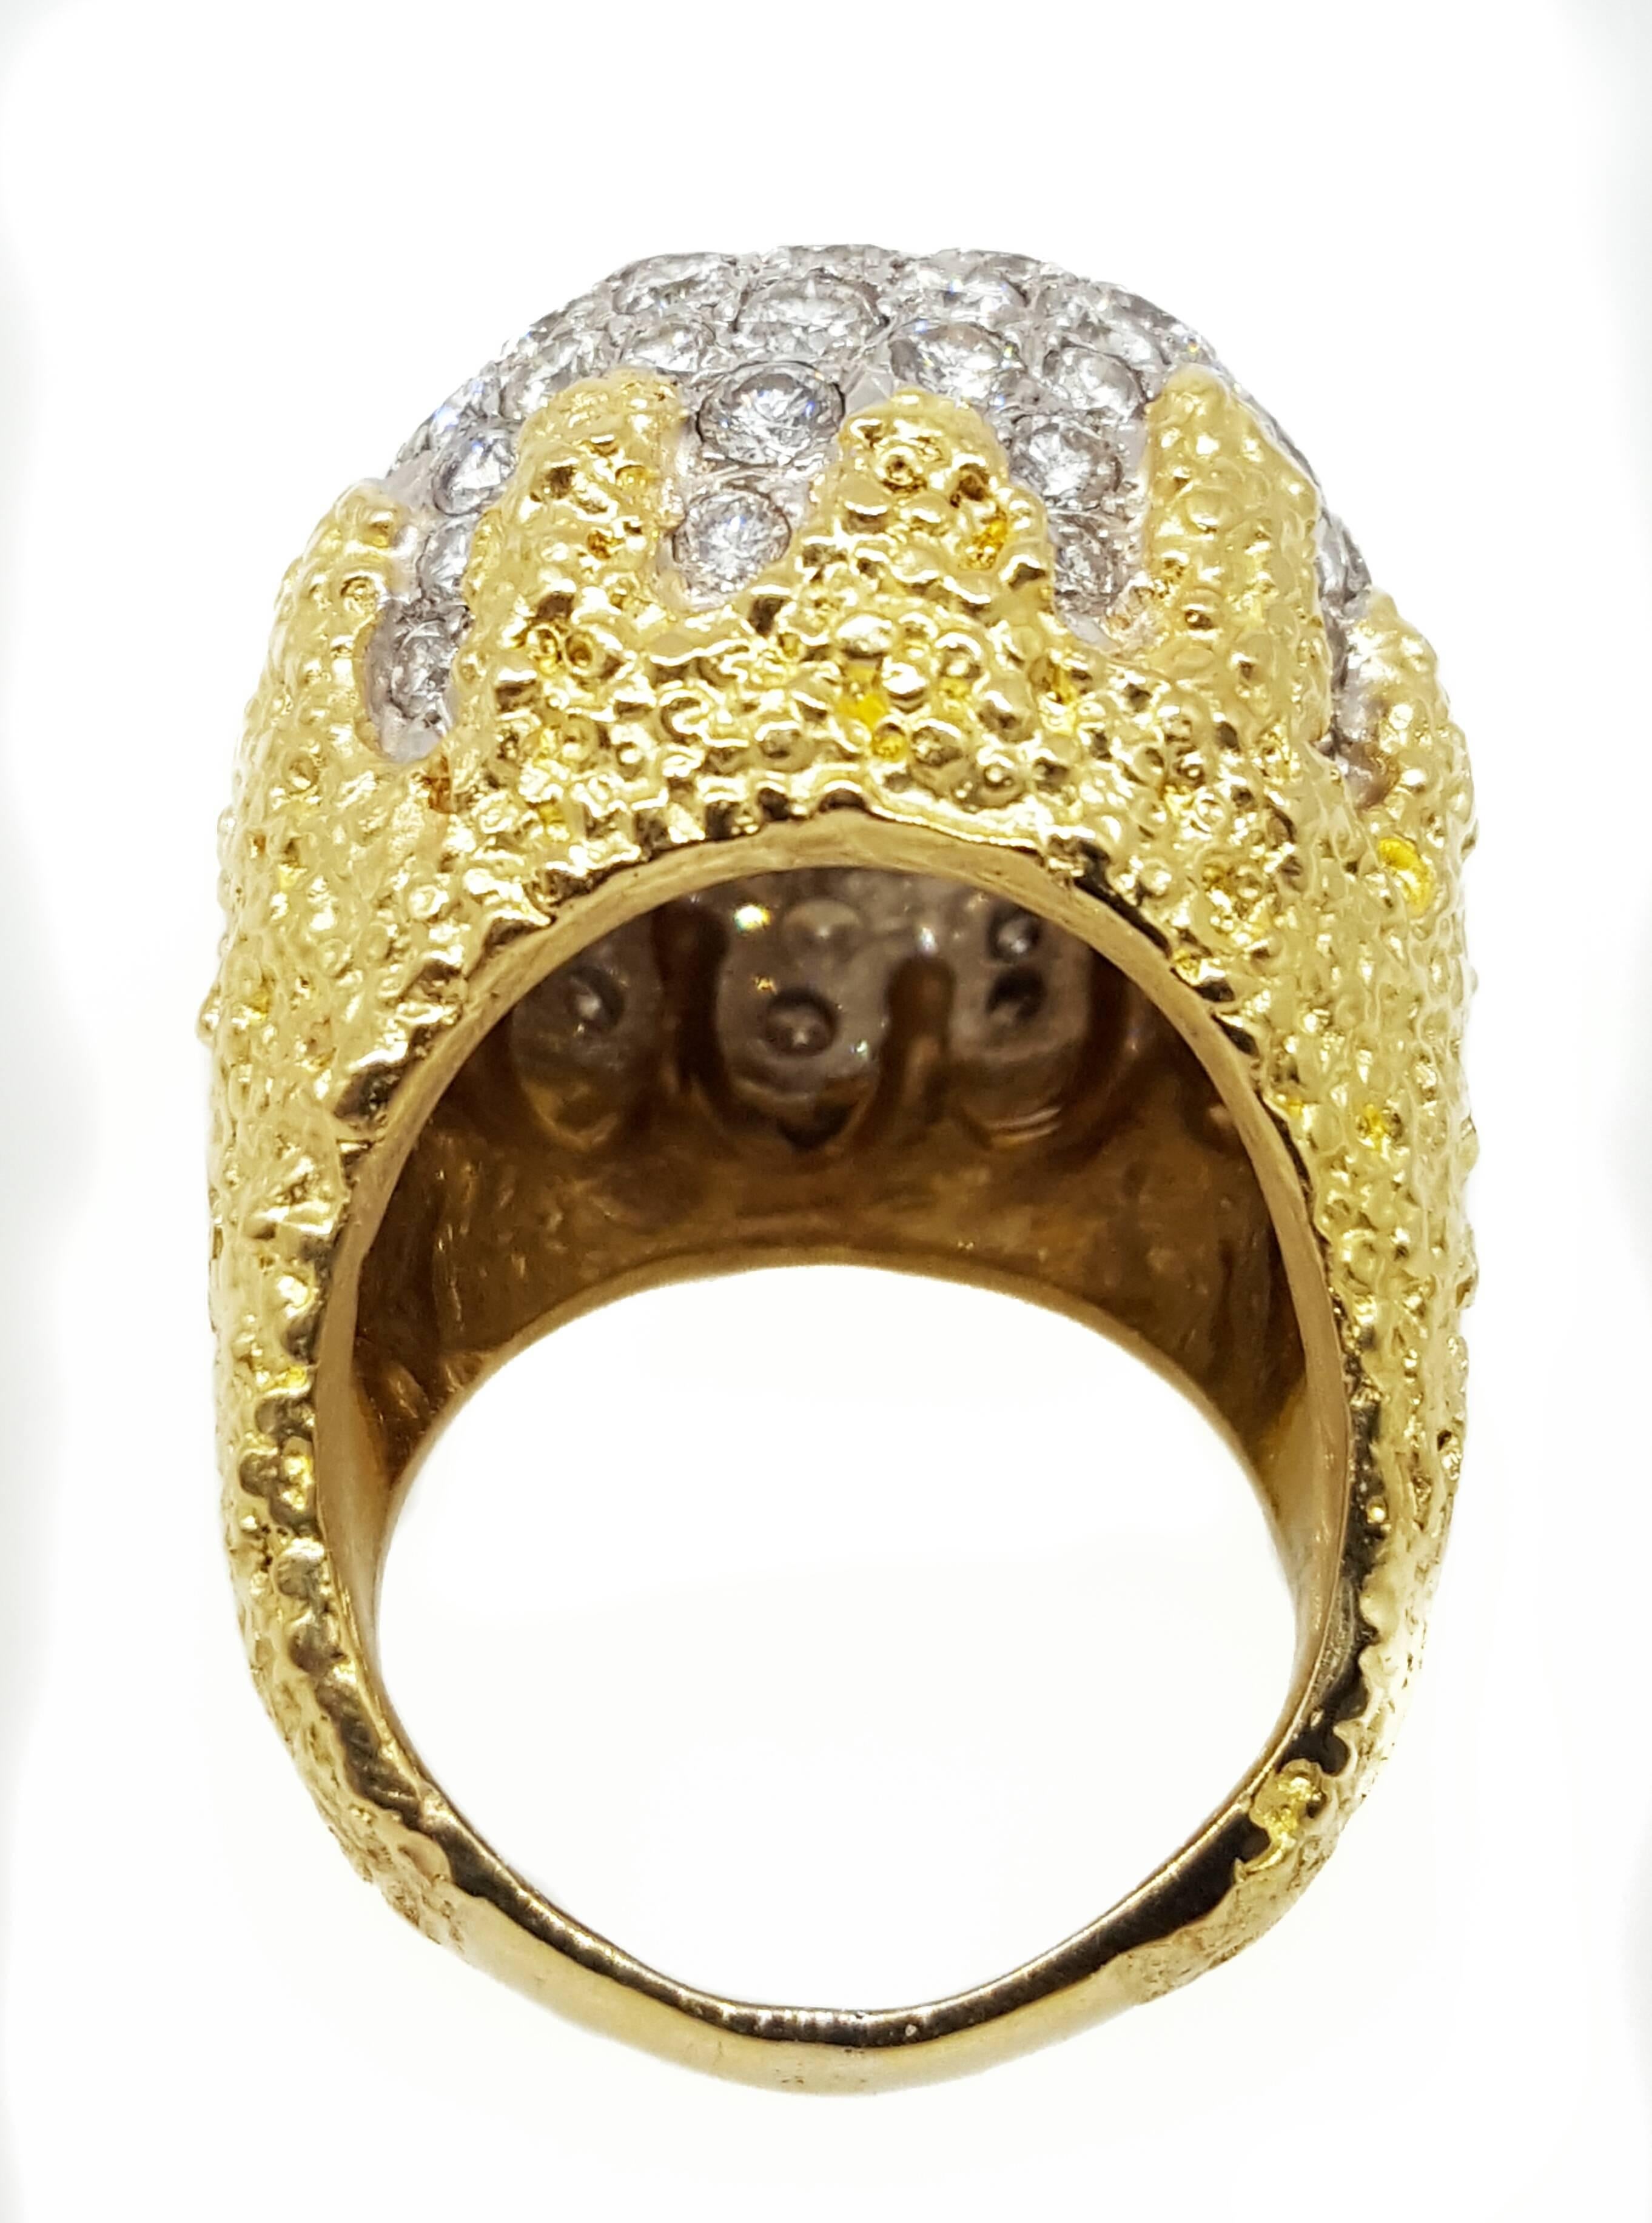 A large diamond dome ring made in the mid 20th century by an unknown designer. The ring consists of round brilliant cut diamonds that weigh exactly 5.62 carats total weight and are H color, VS2 to SI1 clarity. The ring is made out of 18 karat yellow